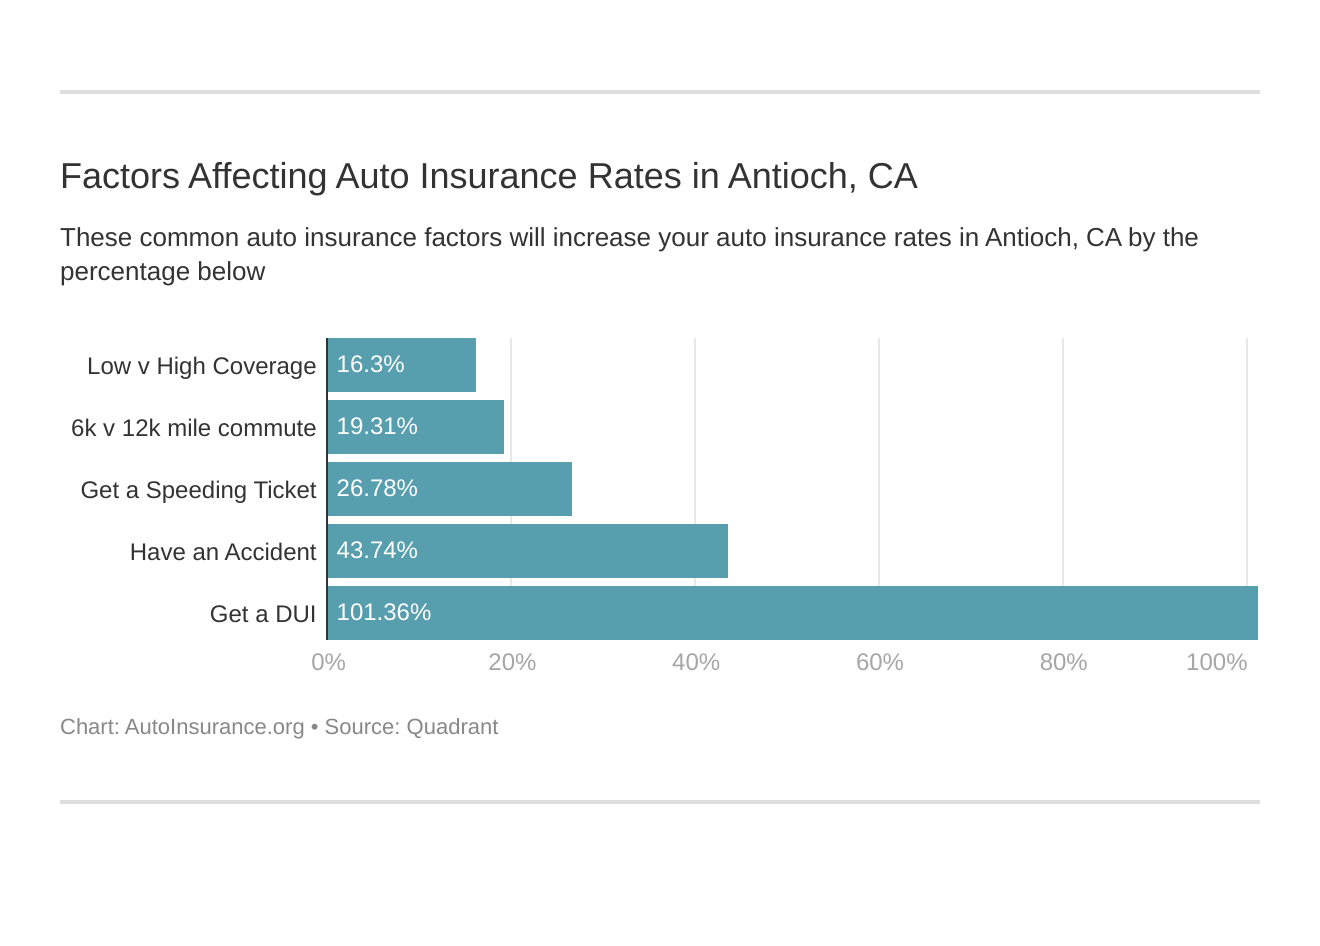 Factors Affecting Auto Insurance Rates in Antioch, CA